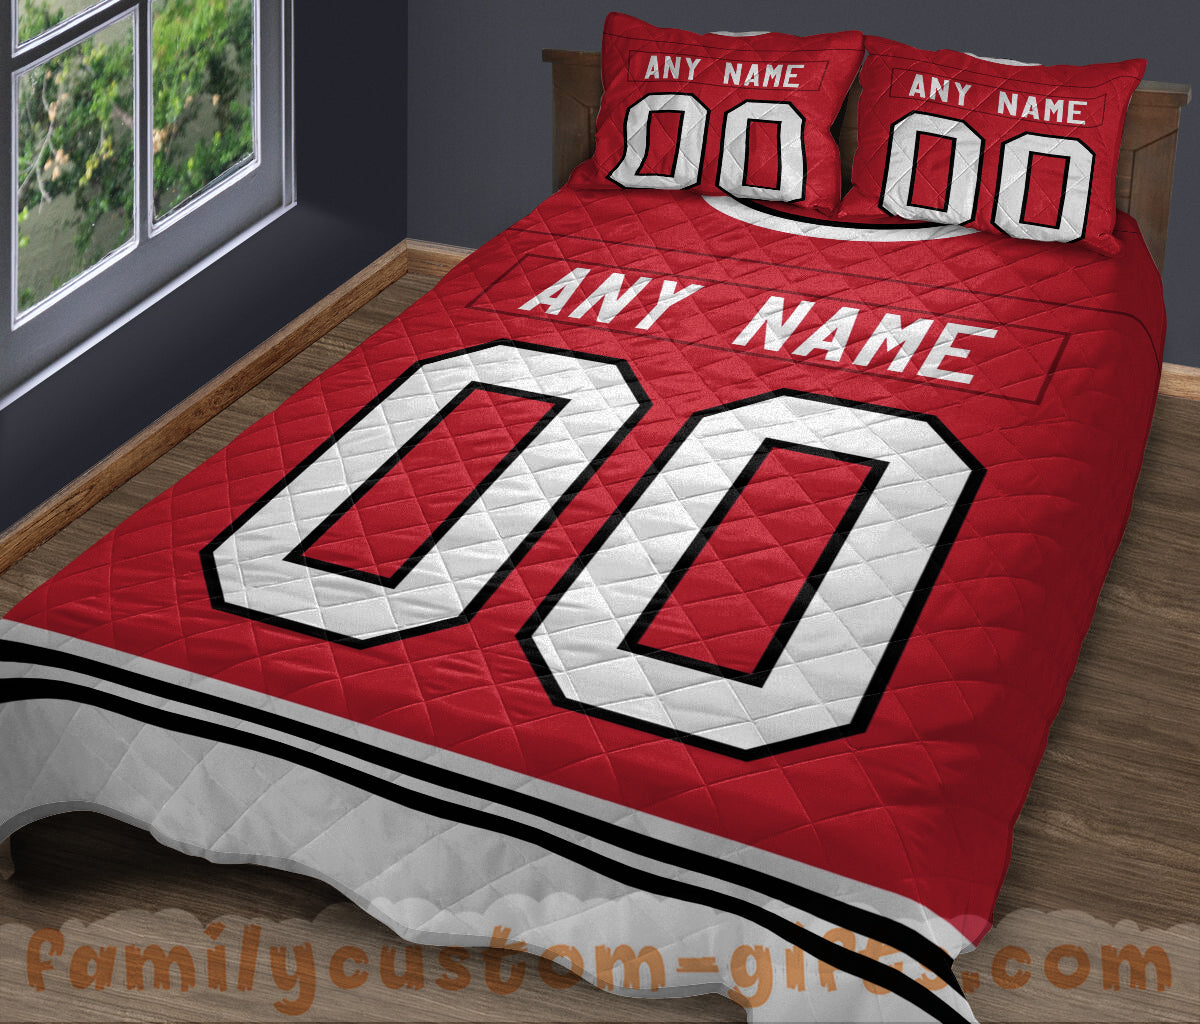 Custom Quilt Sets Chicago Jersey Personalized Ice hockey Premium Quilt Bedding for Men Women